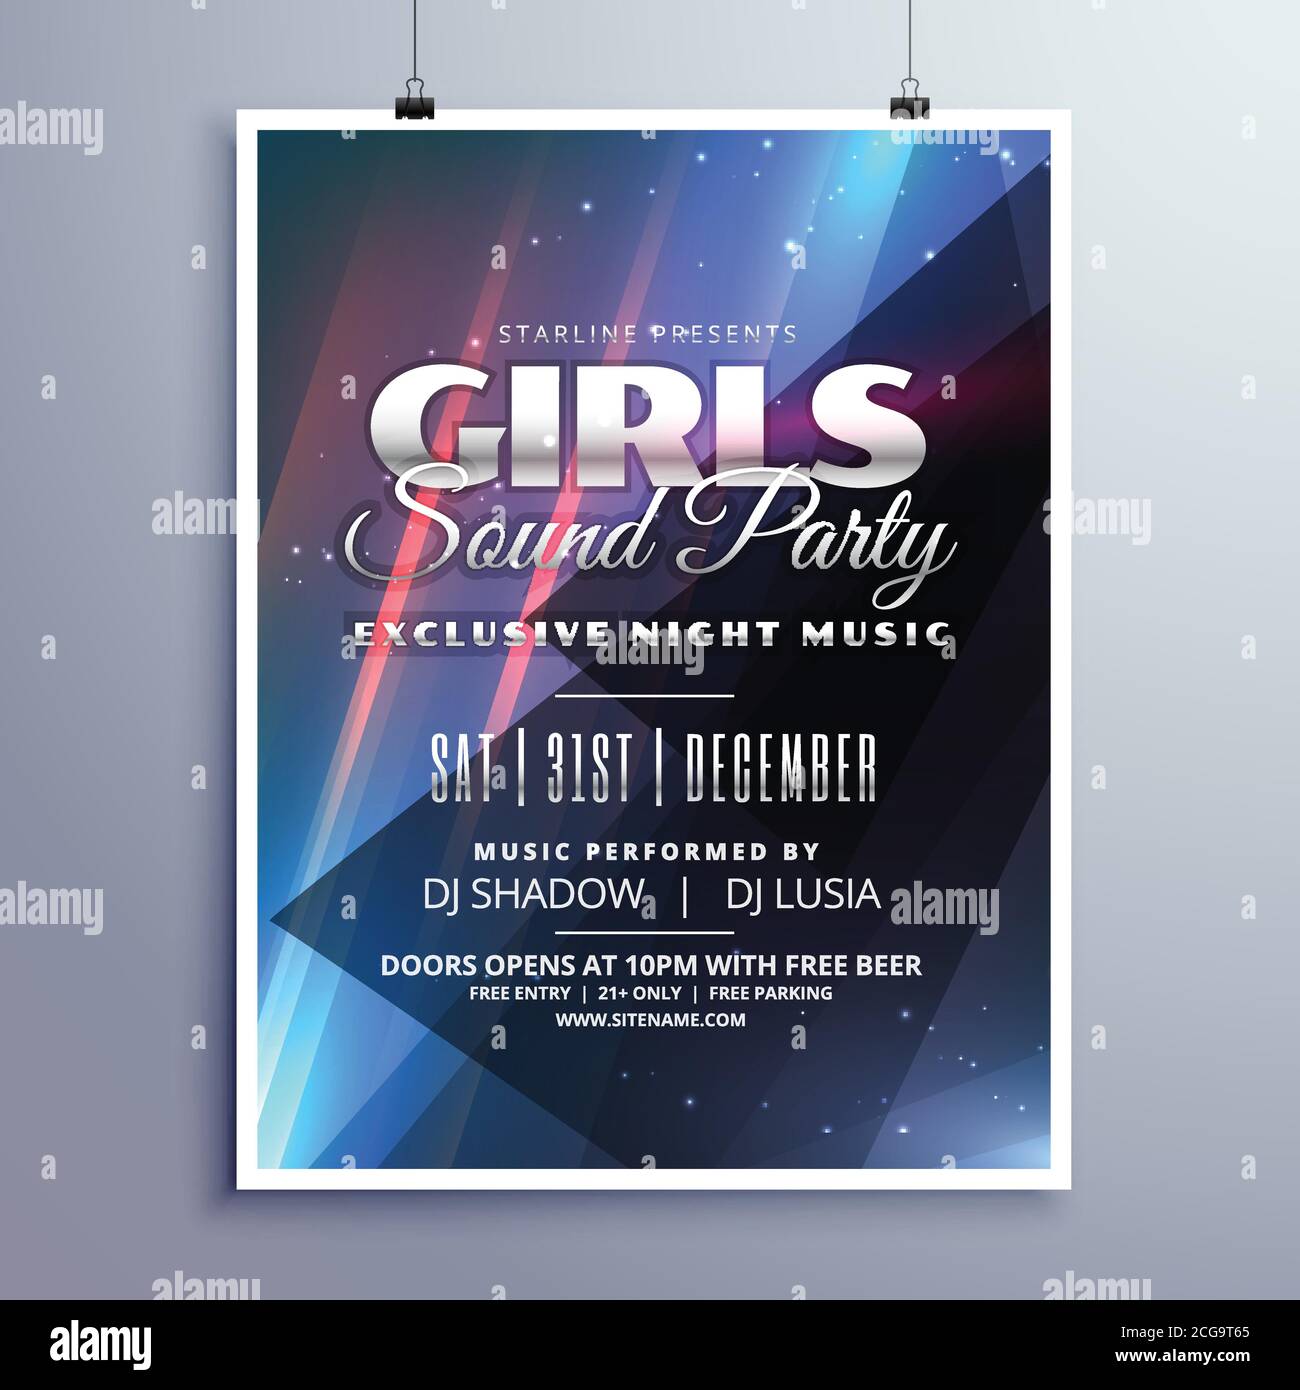 Music Event Flyer Template from c8.alamy.com